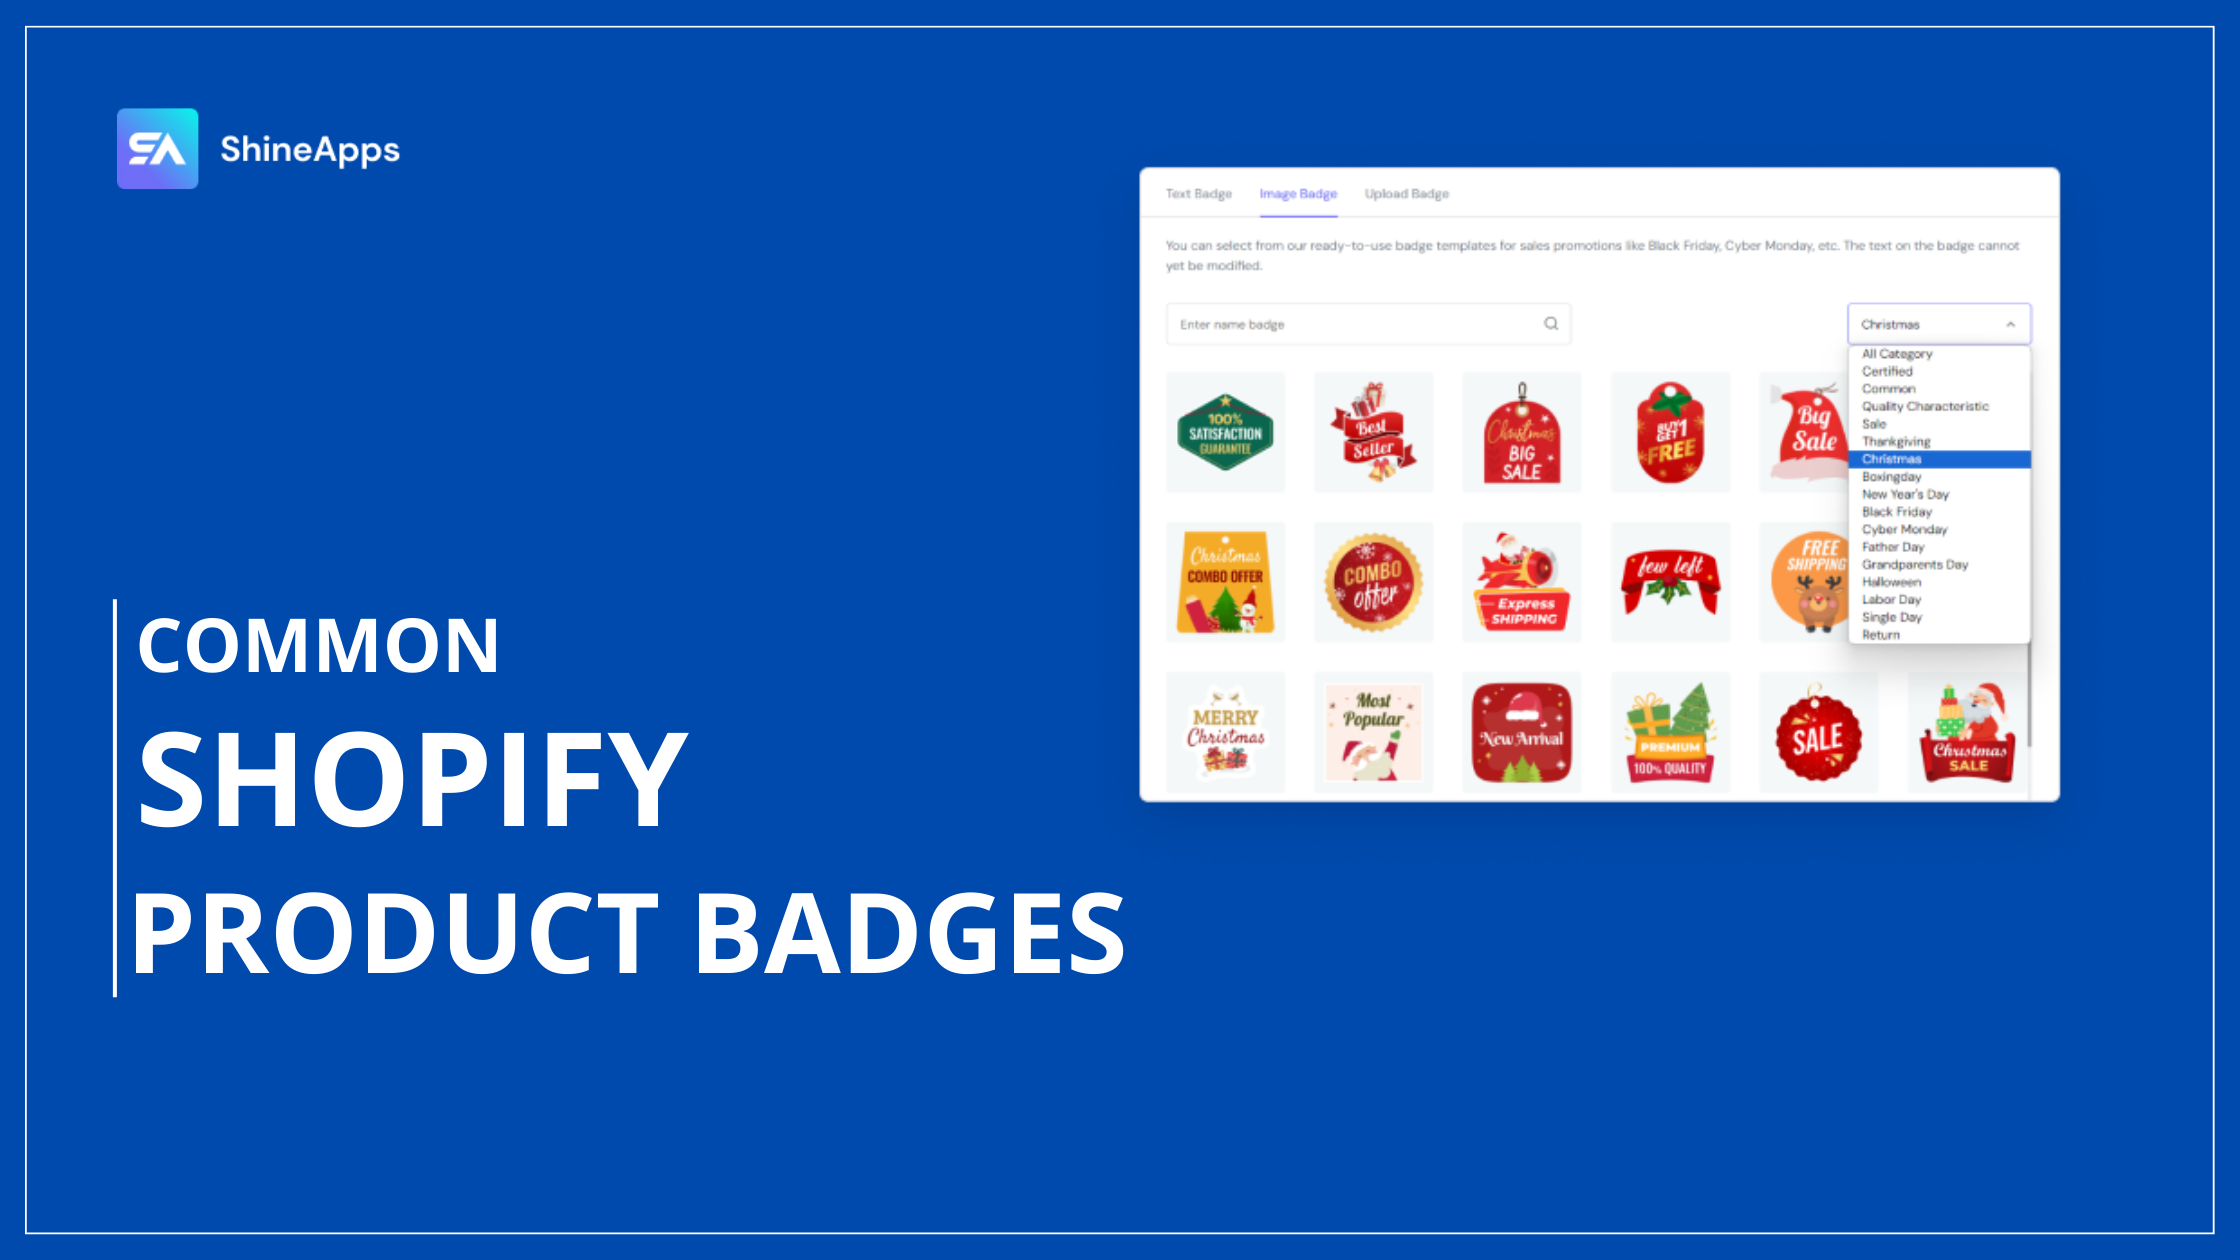 Common Shopify product badges used by store owners